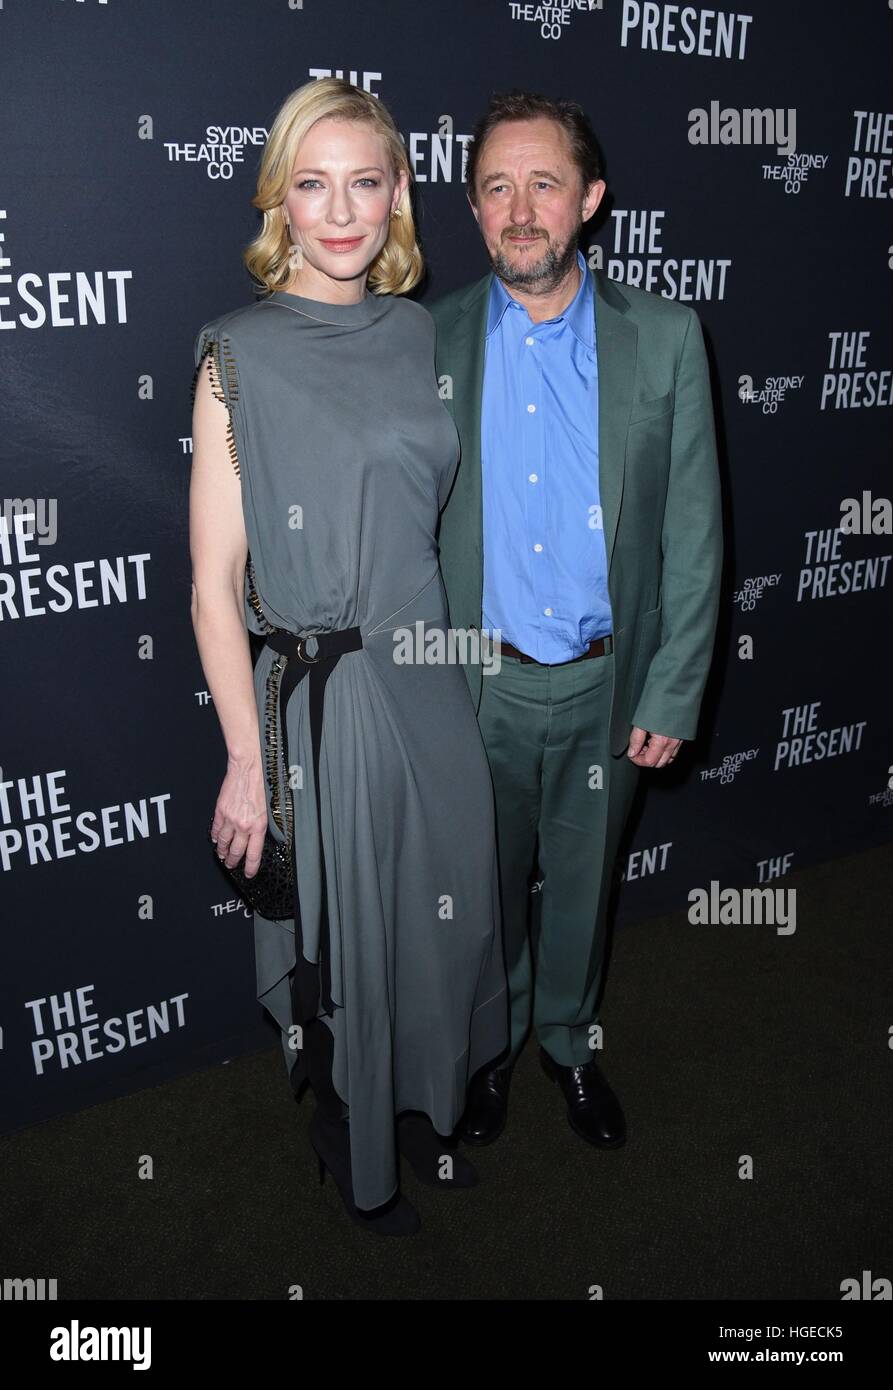 New York, NY, USA. 8th Jan, 2017. Cate Blanchett, Andrew Upton in attendance for THE PRESENT Opening Night on Broadway, The Barrymore Theatre, New York, NY January 8, 2017. © Derek Storm/Everett Collection/Alamy Live News Stock Photo